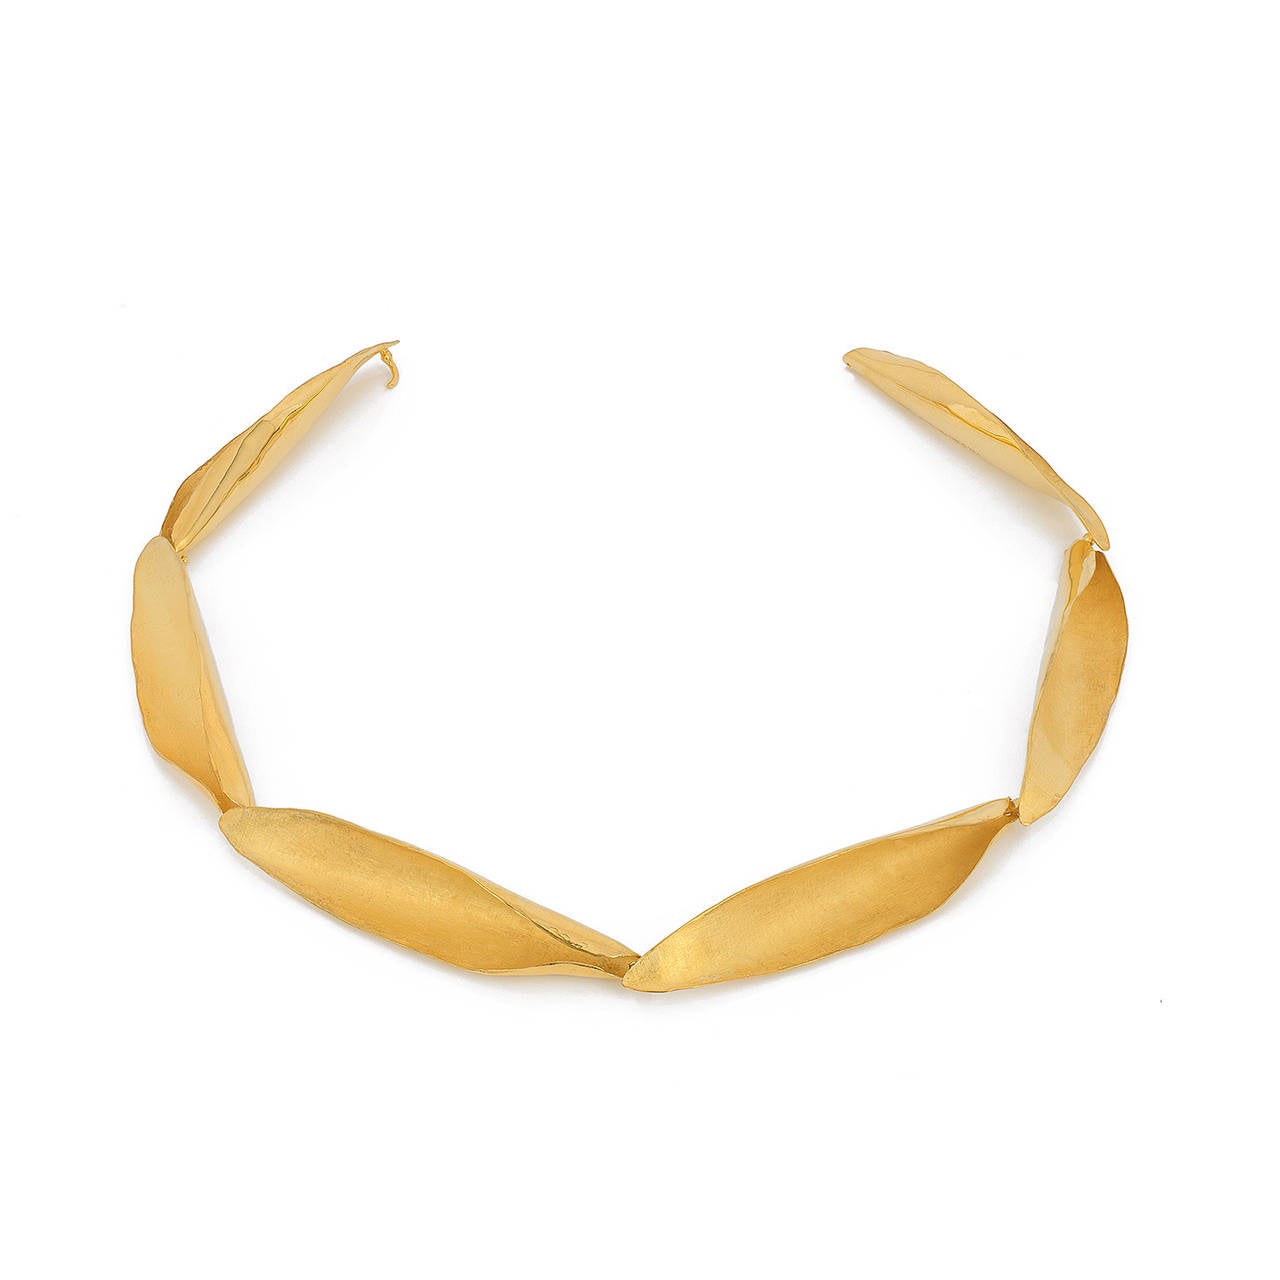 An exquisite Renato Cipullo 18kt Yellow gold necklace comprised of six beautifully crafted gold leaves that form an elegant seamless collar. Leaves have a polished exterior and soft matte interior.
Each leaf measures 7.2 cm x 1.6 cm